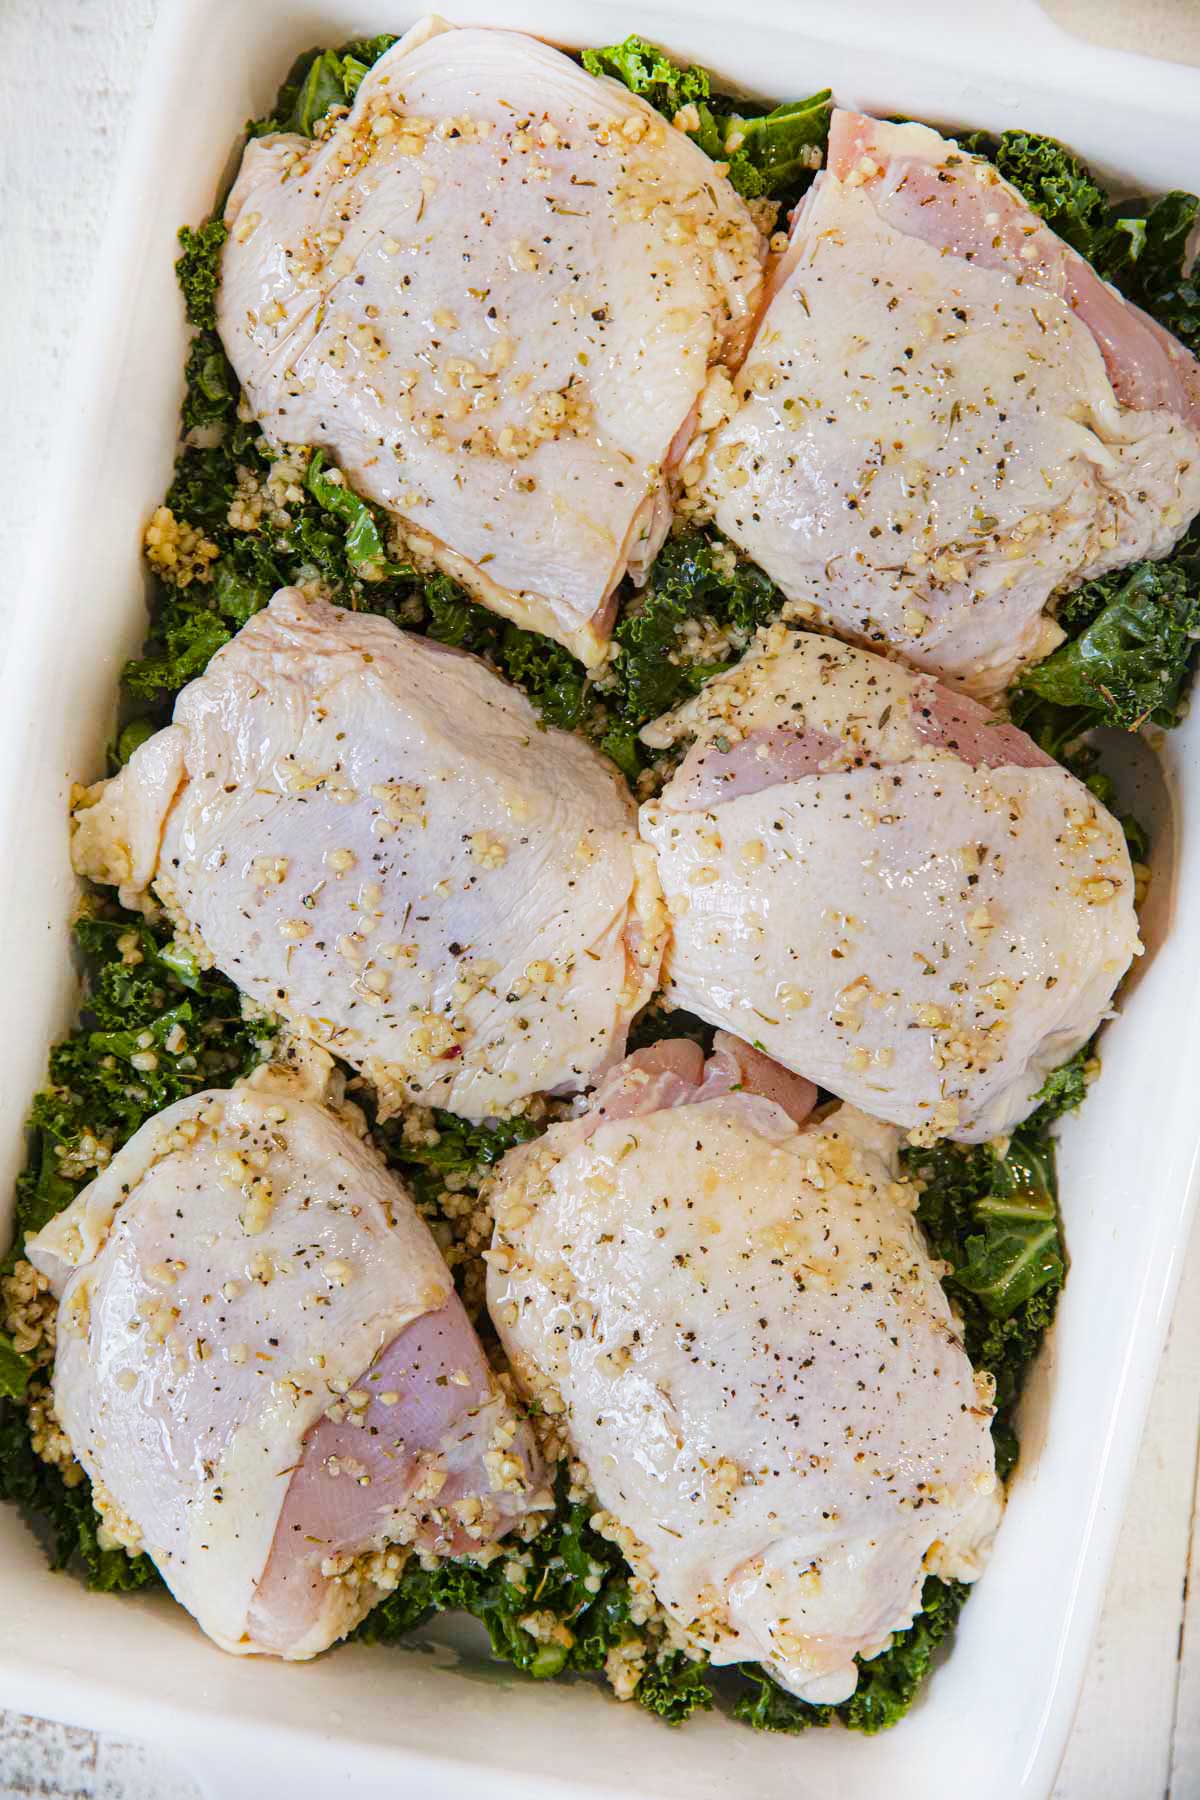 Garlic Braised Chicken with Kale (1-Pot Dinner!) - Cooking Made Healthy